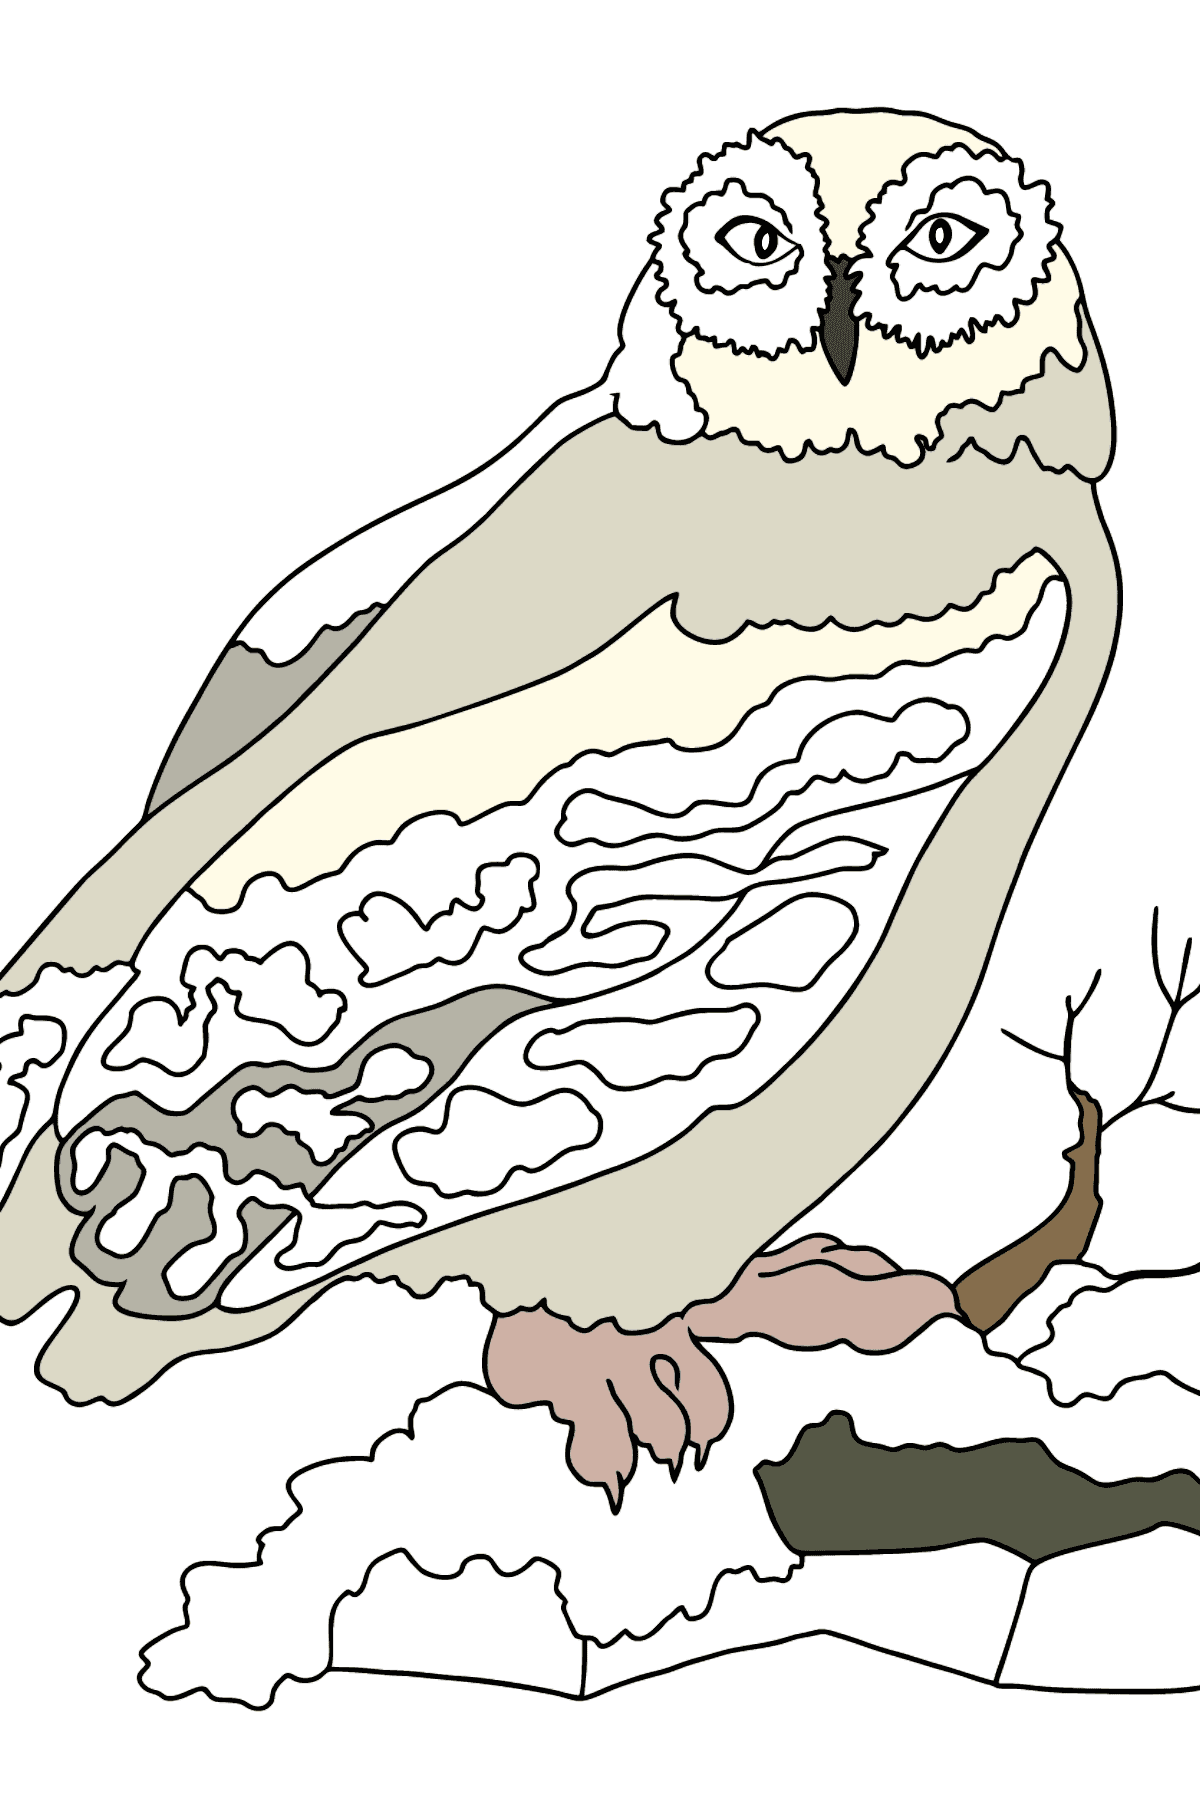 Coloring Page - An Owl on a Hunt - Coloring Pages for Kids